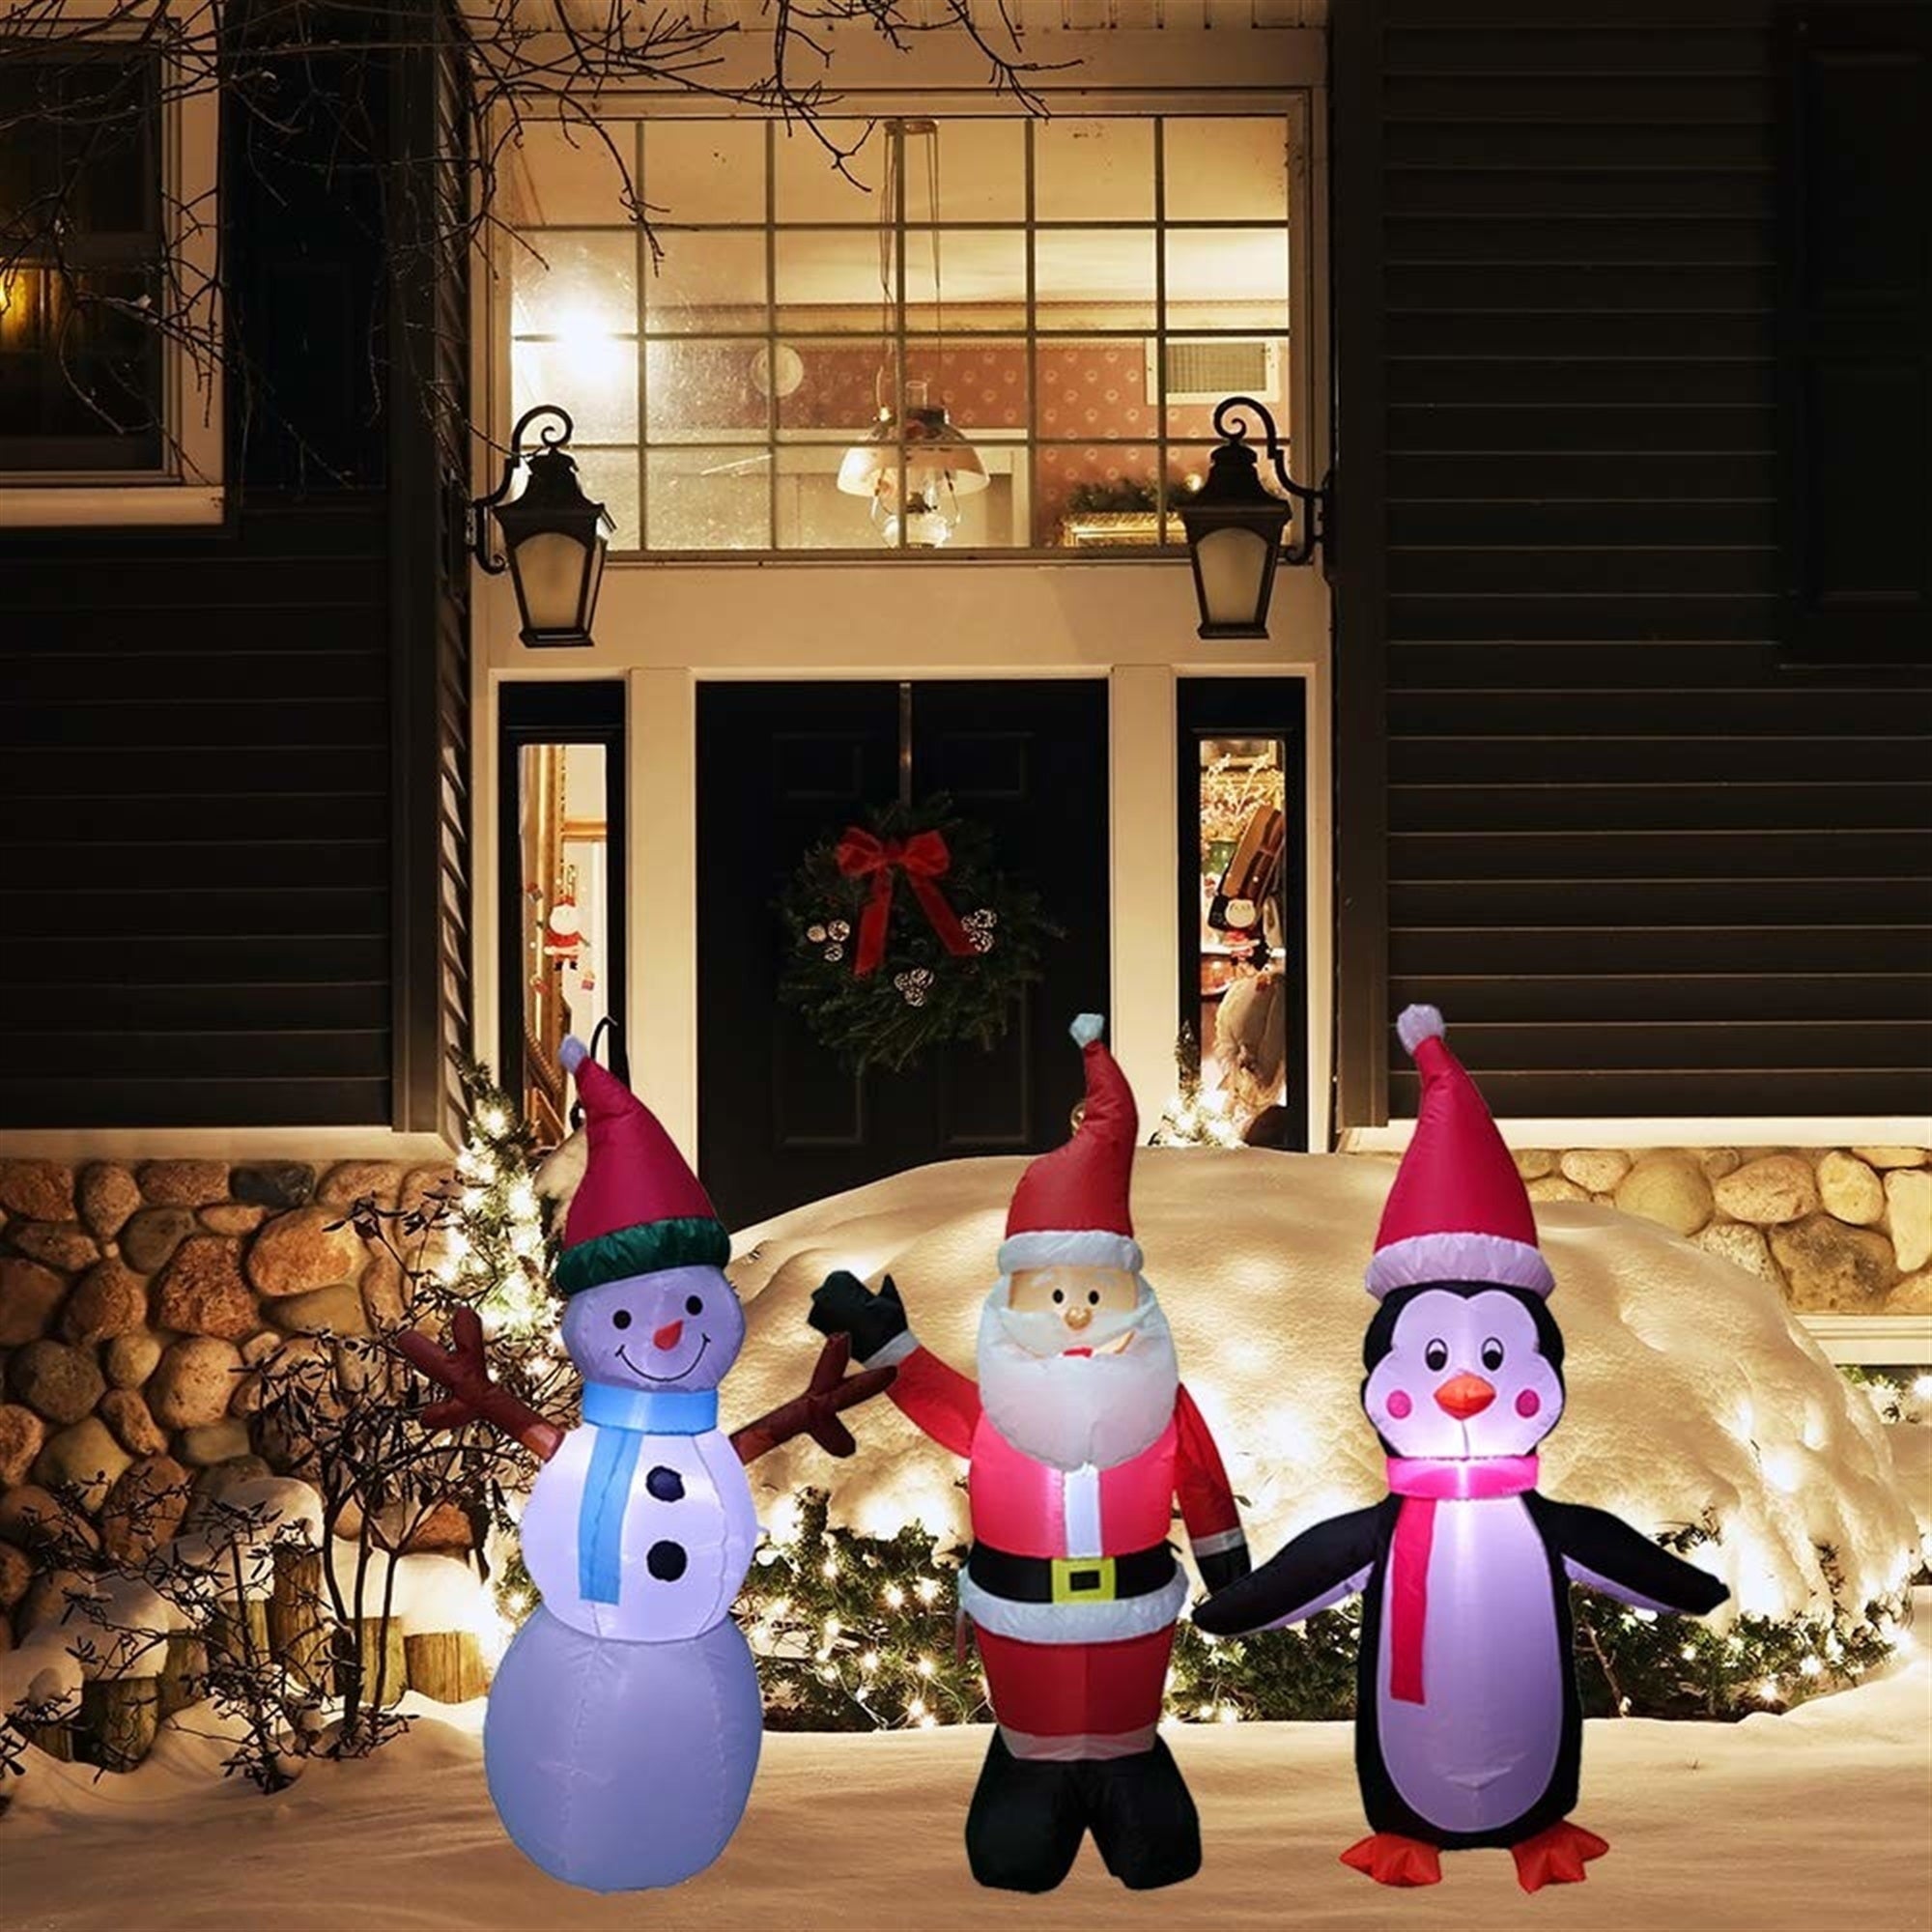 ProductWorks Candy Cane Lane Inflatable Penguin Outdoor Holiday Decor, 4'